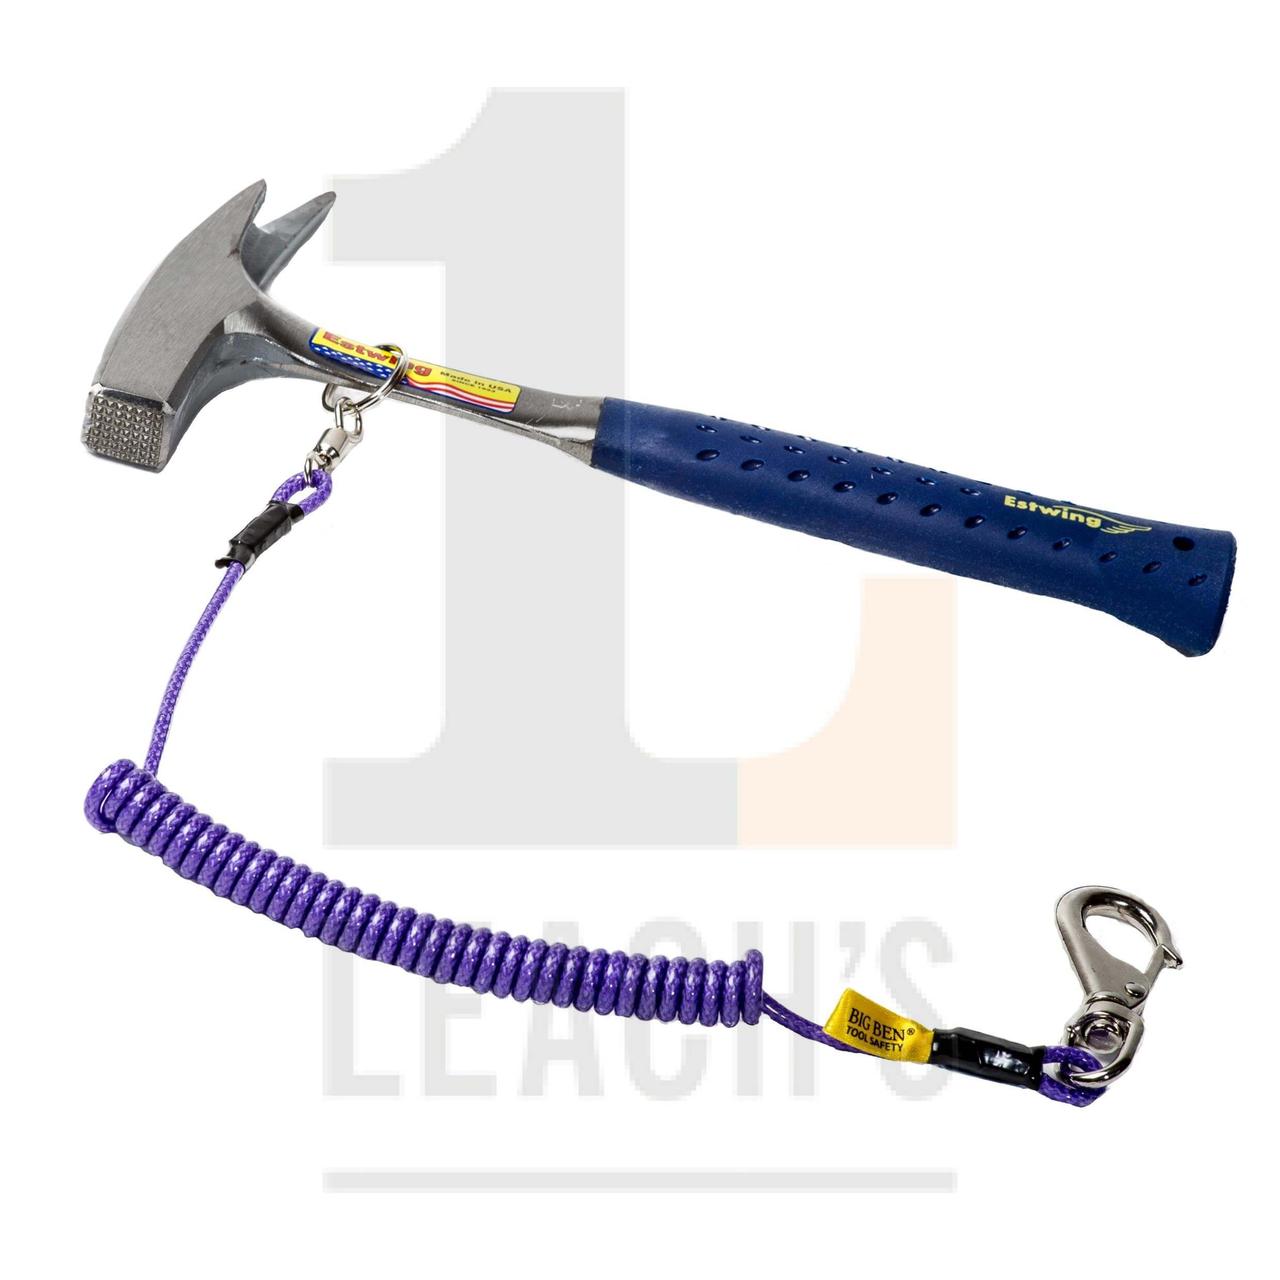 Estwing Hammer with Podger Claw - Vinyl Handle, Milled Face c/w HD Tool Safety Rope / Estwing Кровельный - фото 2 - id-p105318572